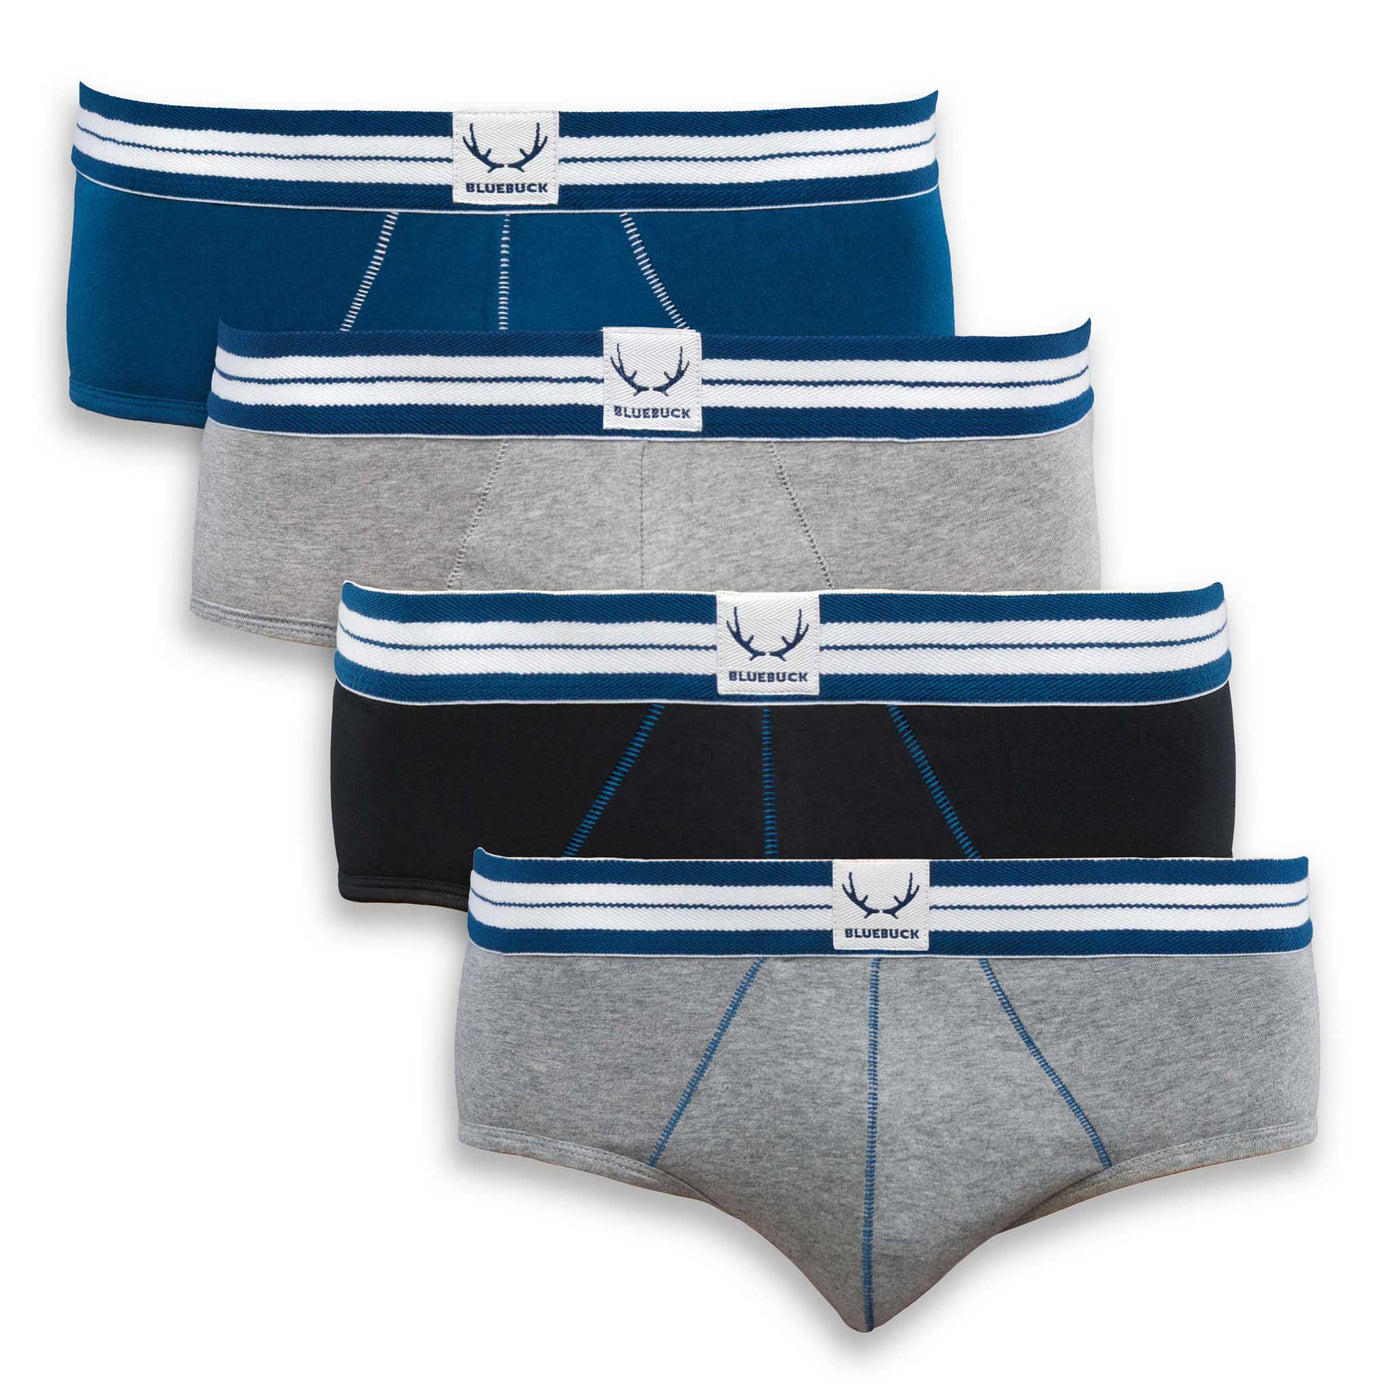 Pack of 4 classic briefs (second option)